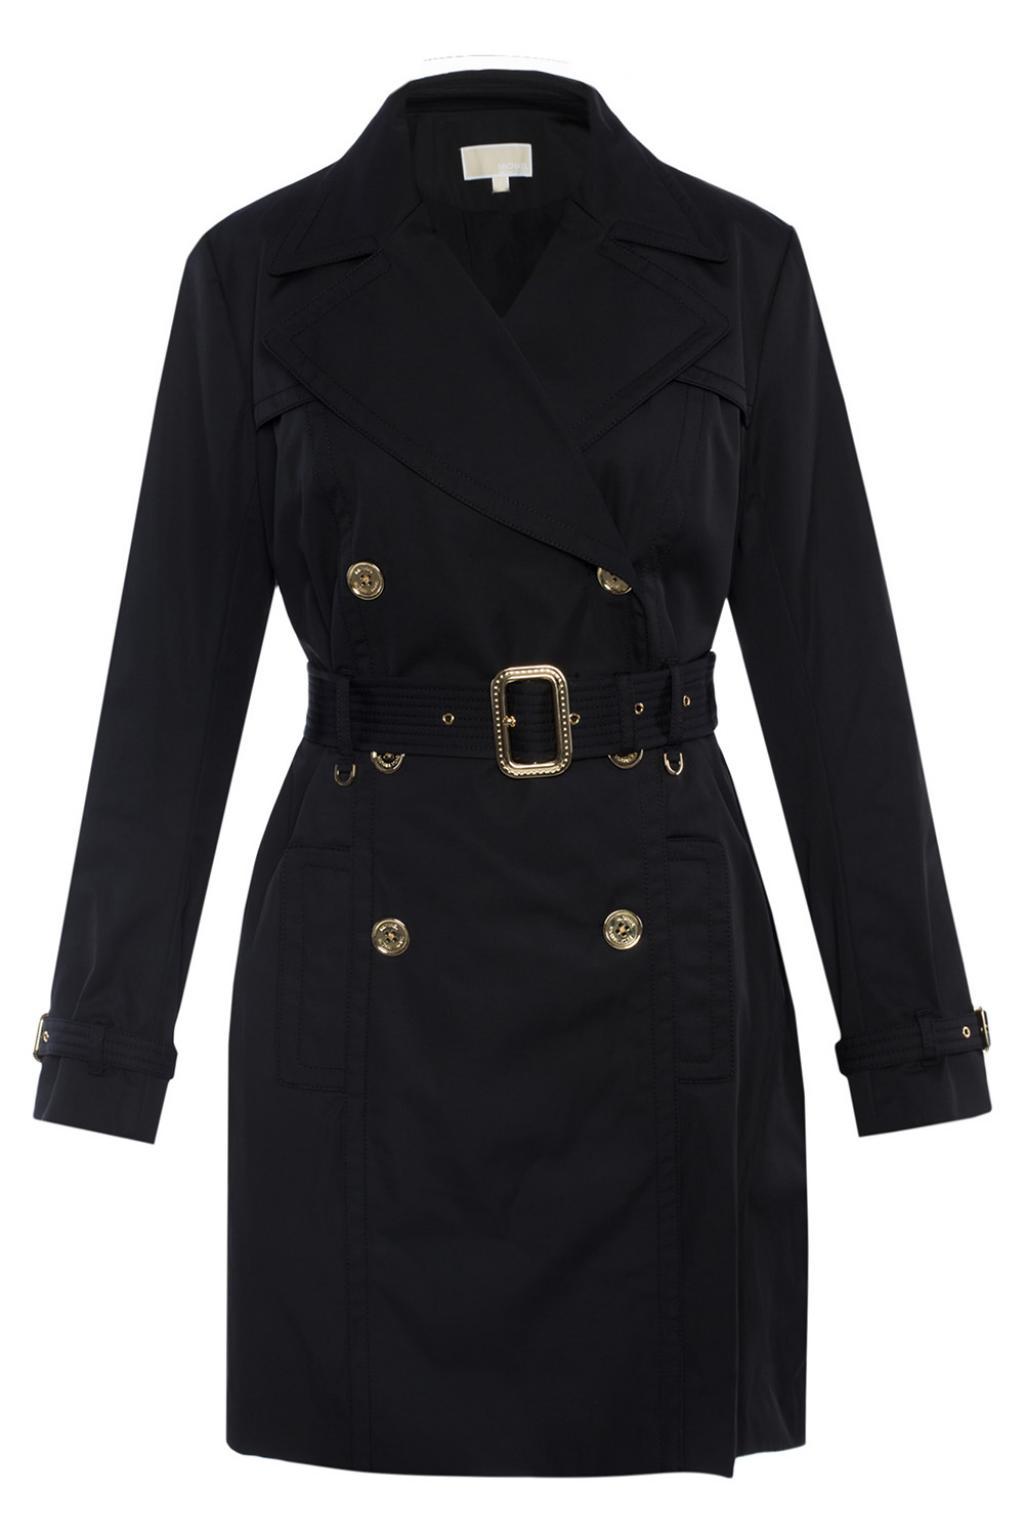 Michael Kors Cotton Double-breasted Trench Coat in Black - Lyst